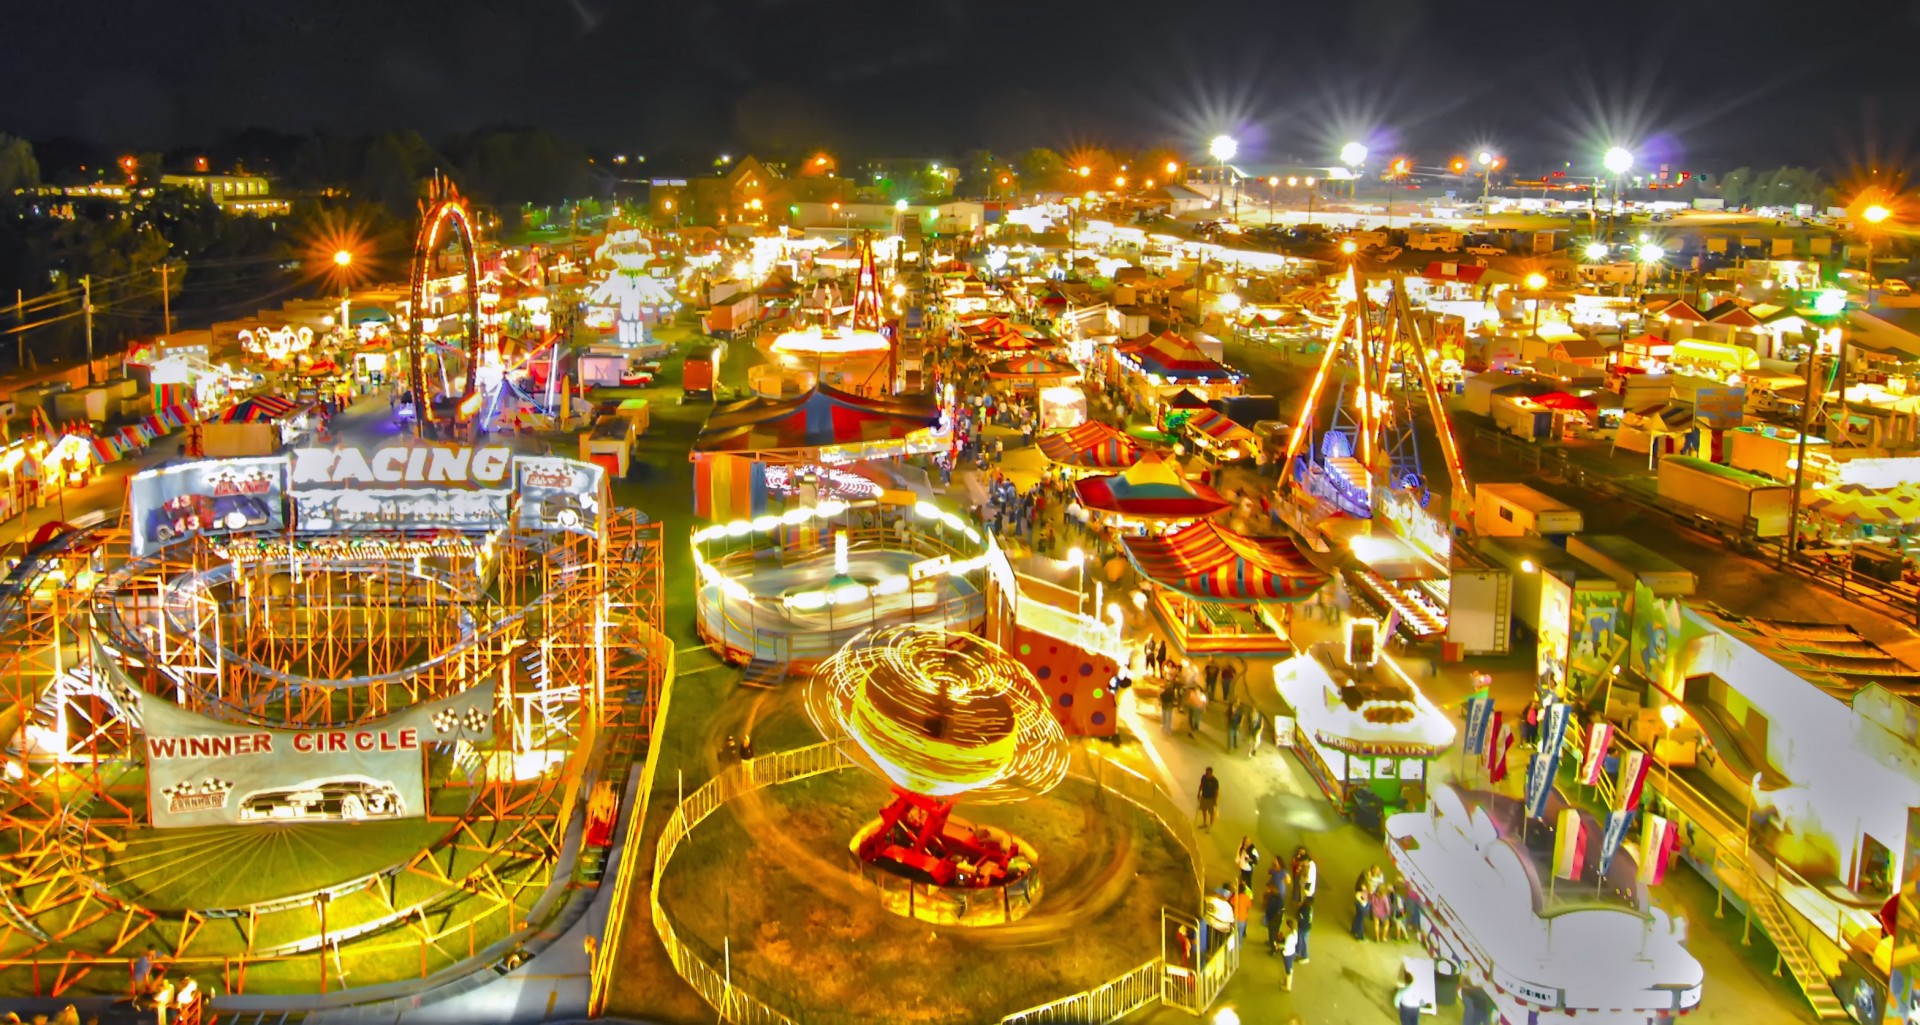 San Diego County Fair Boasts Over 1,000,000 Visitors and Tons of